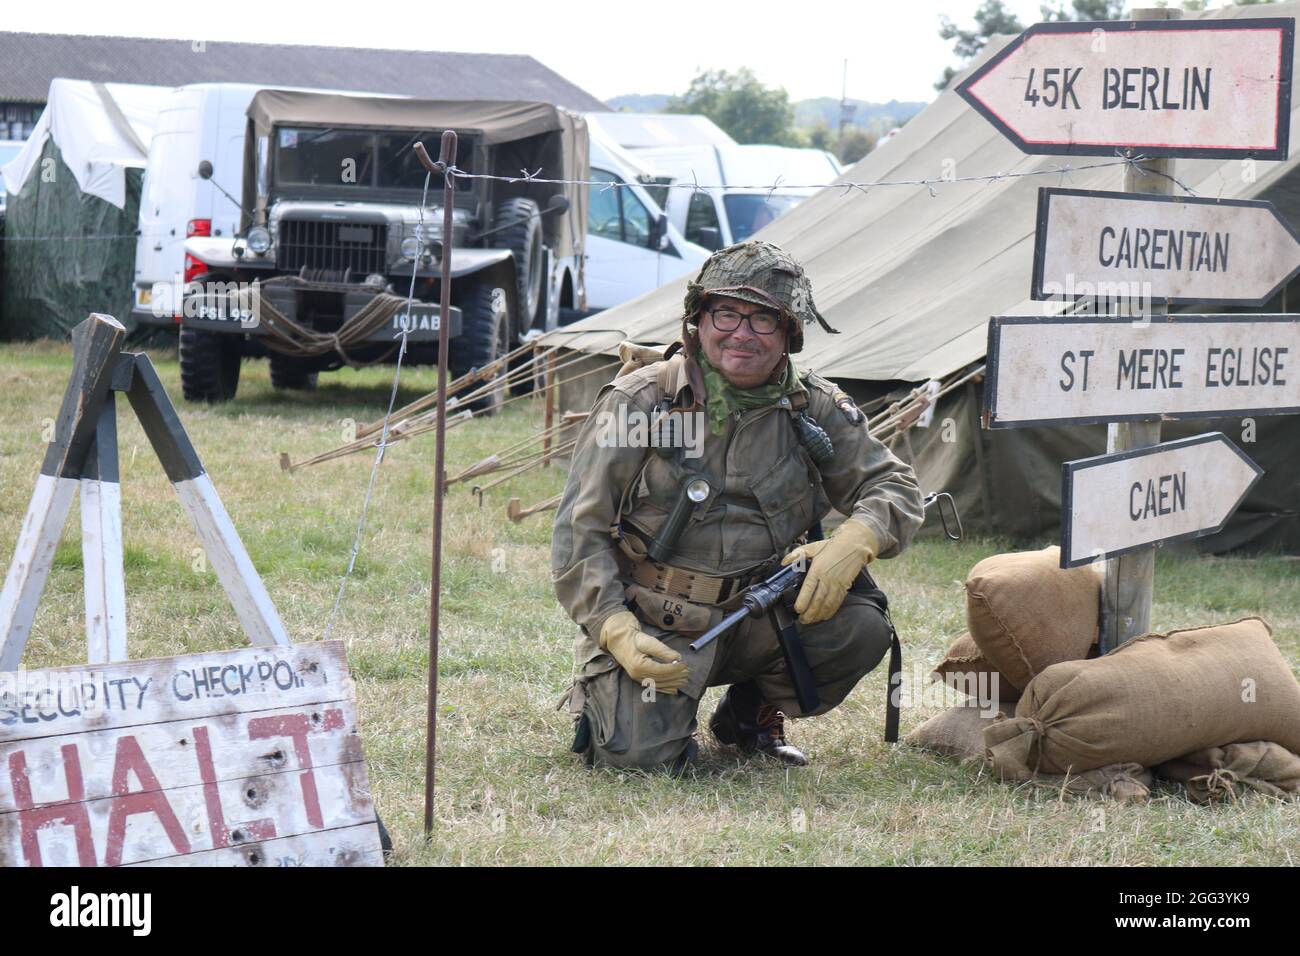 Tanks, Trucks and Firepower Show, Rugby, August 2021 - 1940s American Reenactment. Stock Photo